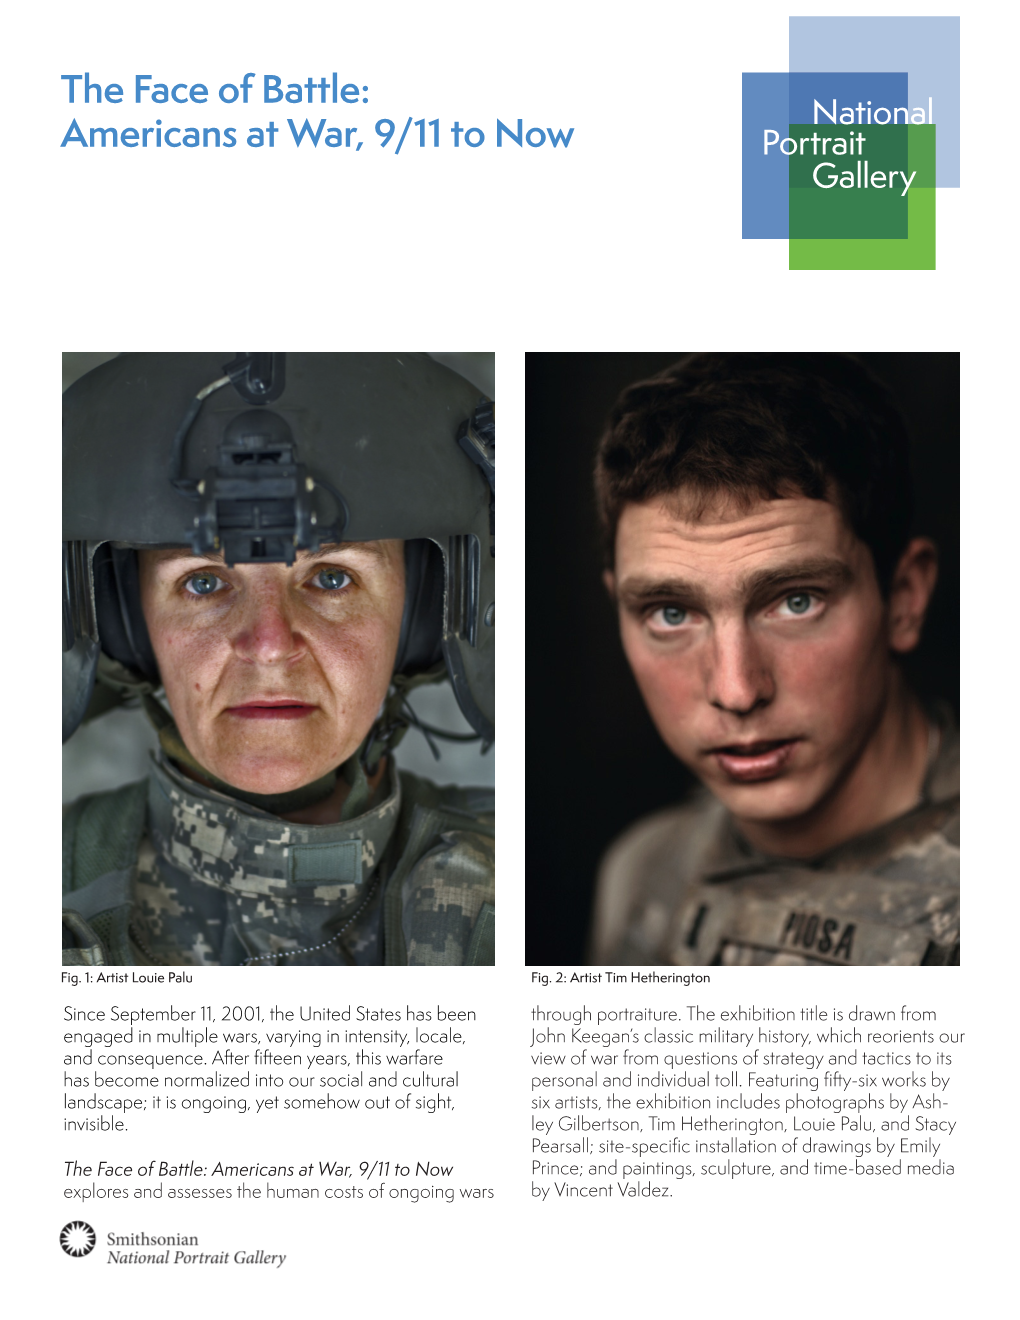 The Face of Battle: Americans at War, 9/11 to Now